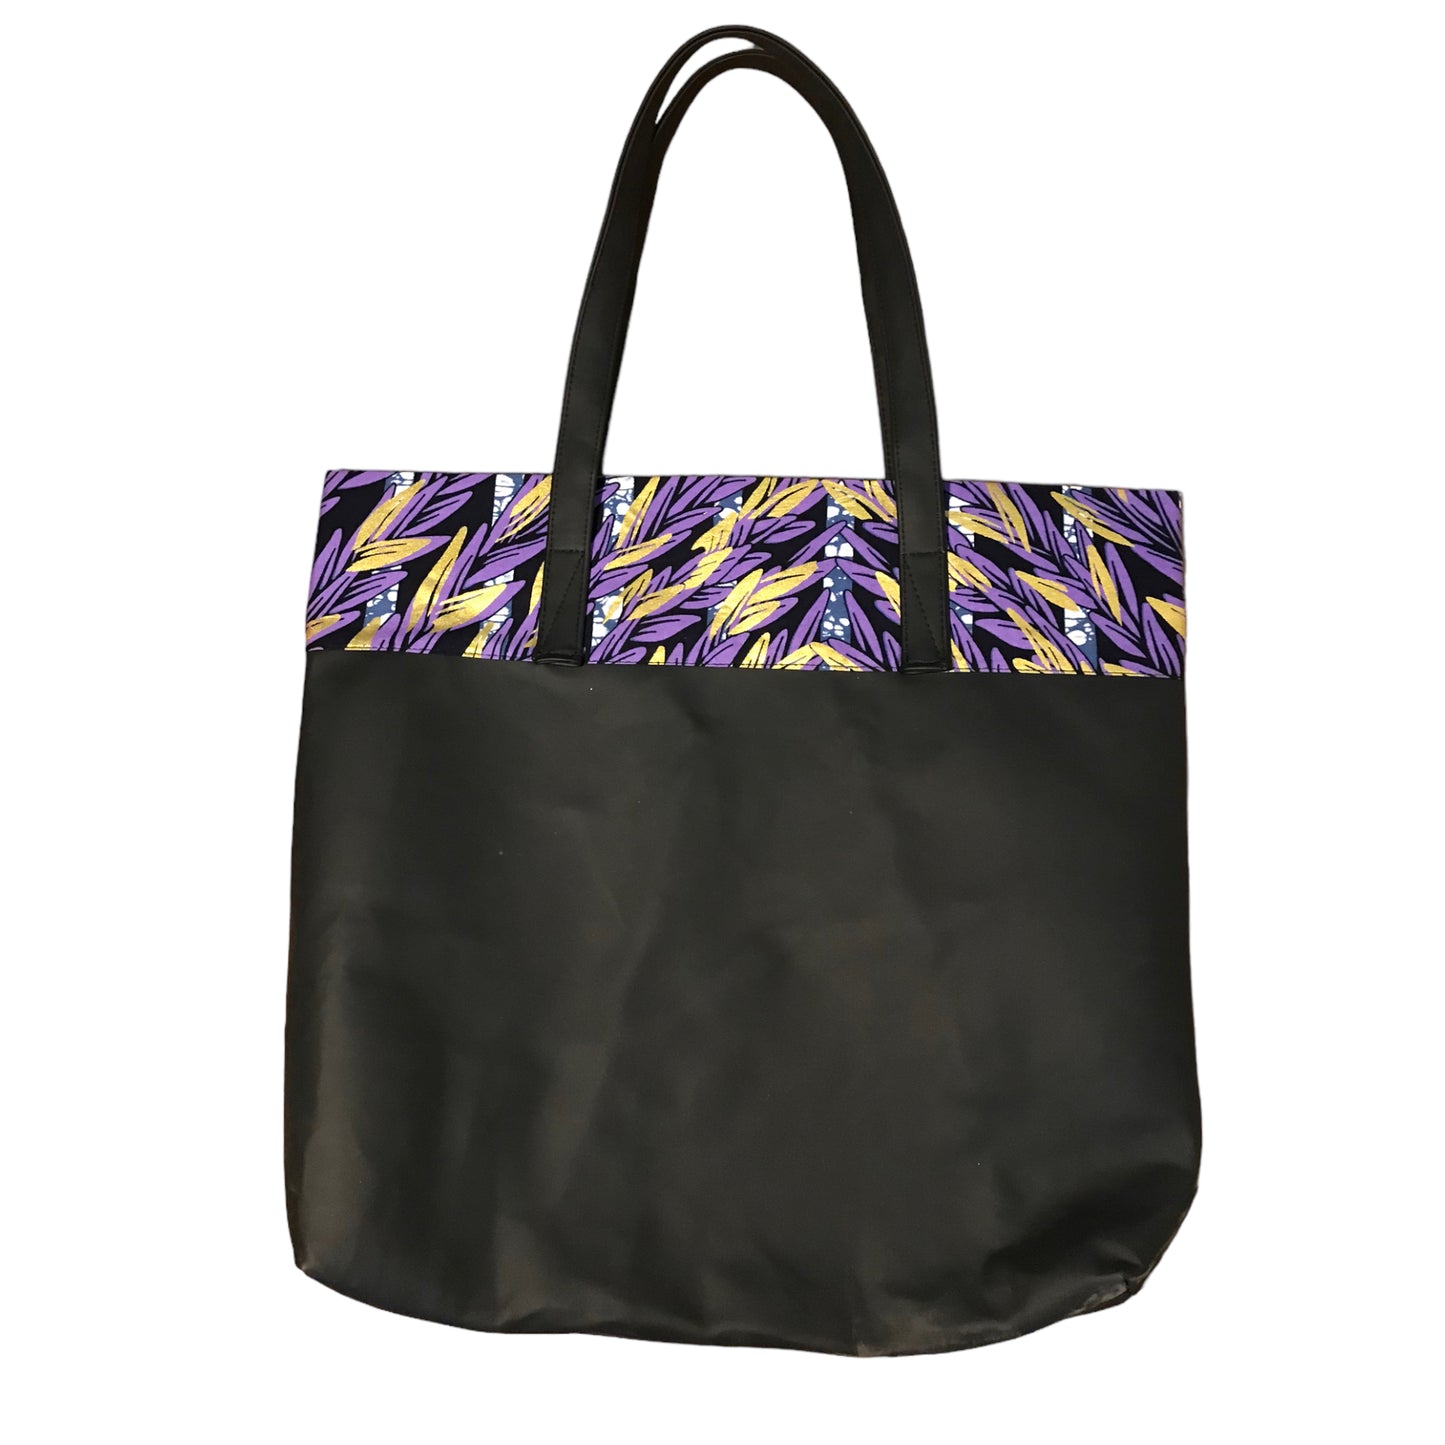 Halfsie Leather bag with African Print Fabric